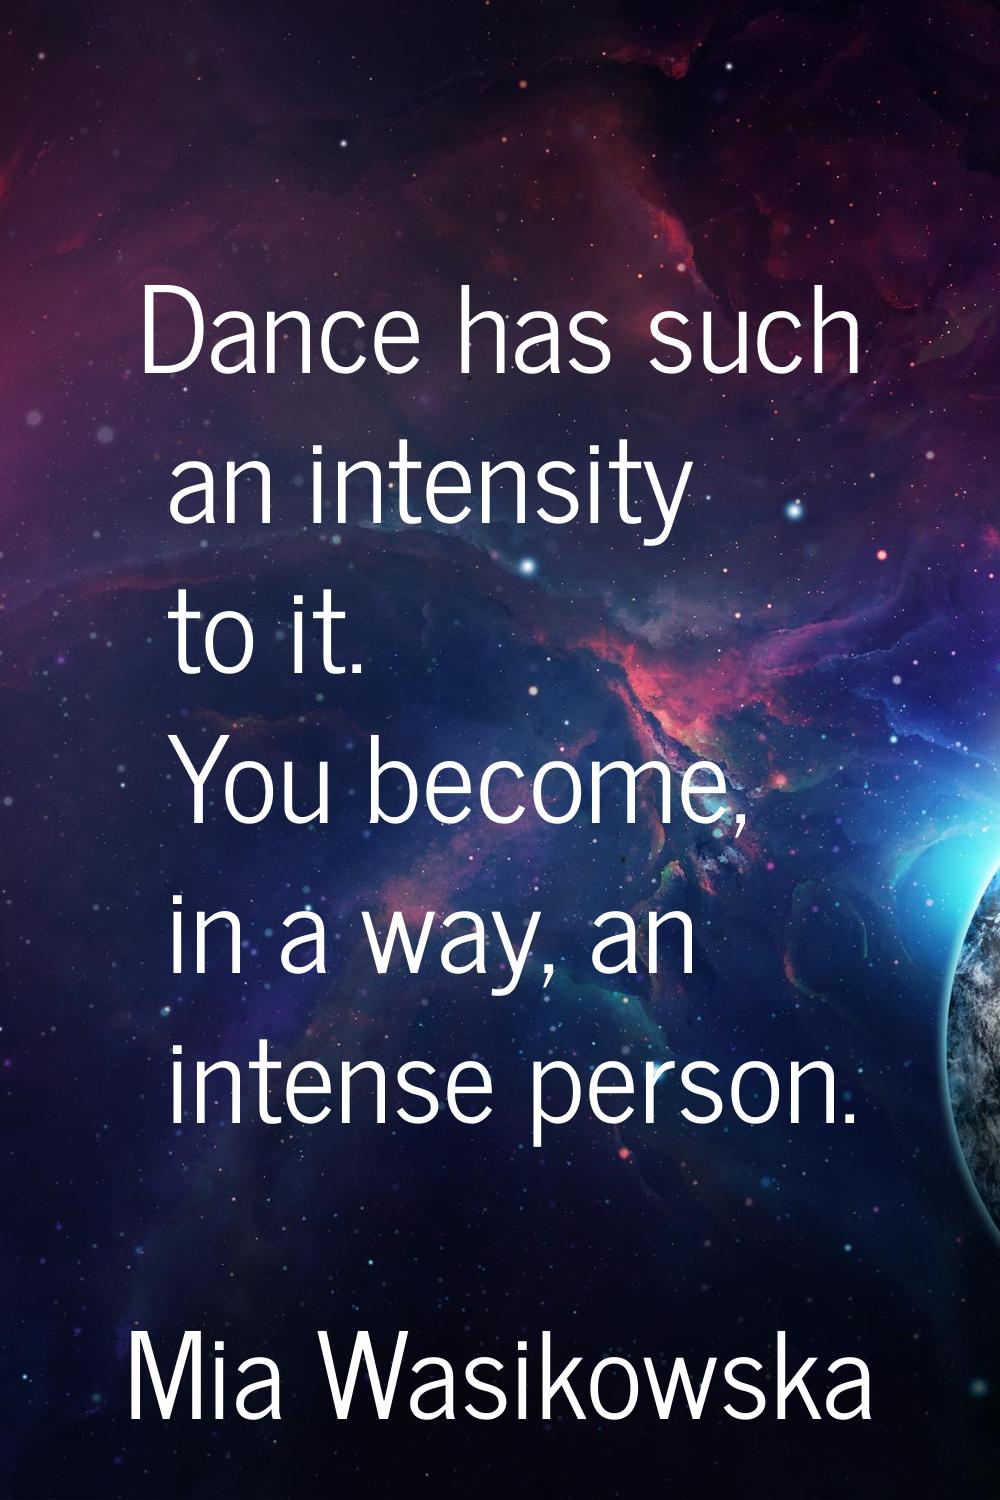 Dance has such an intensity to it. You become, in a way, an intense person.